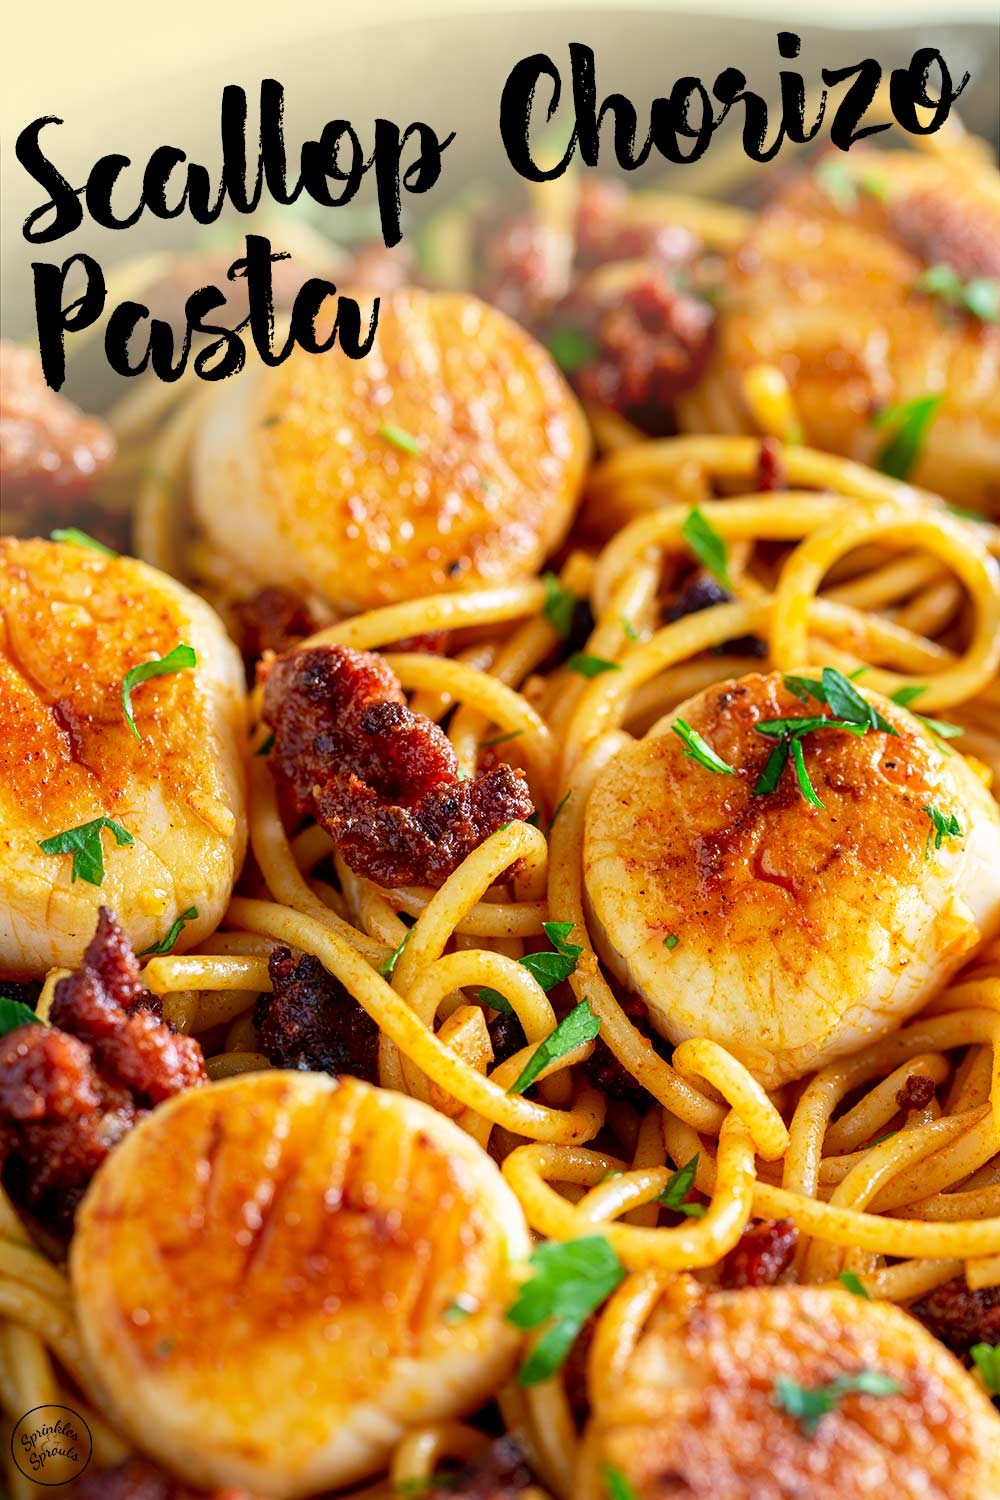 a picture of the scallop chorizo pasta, with text overlay for using on pinterest